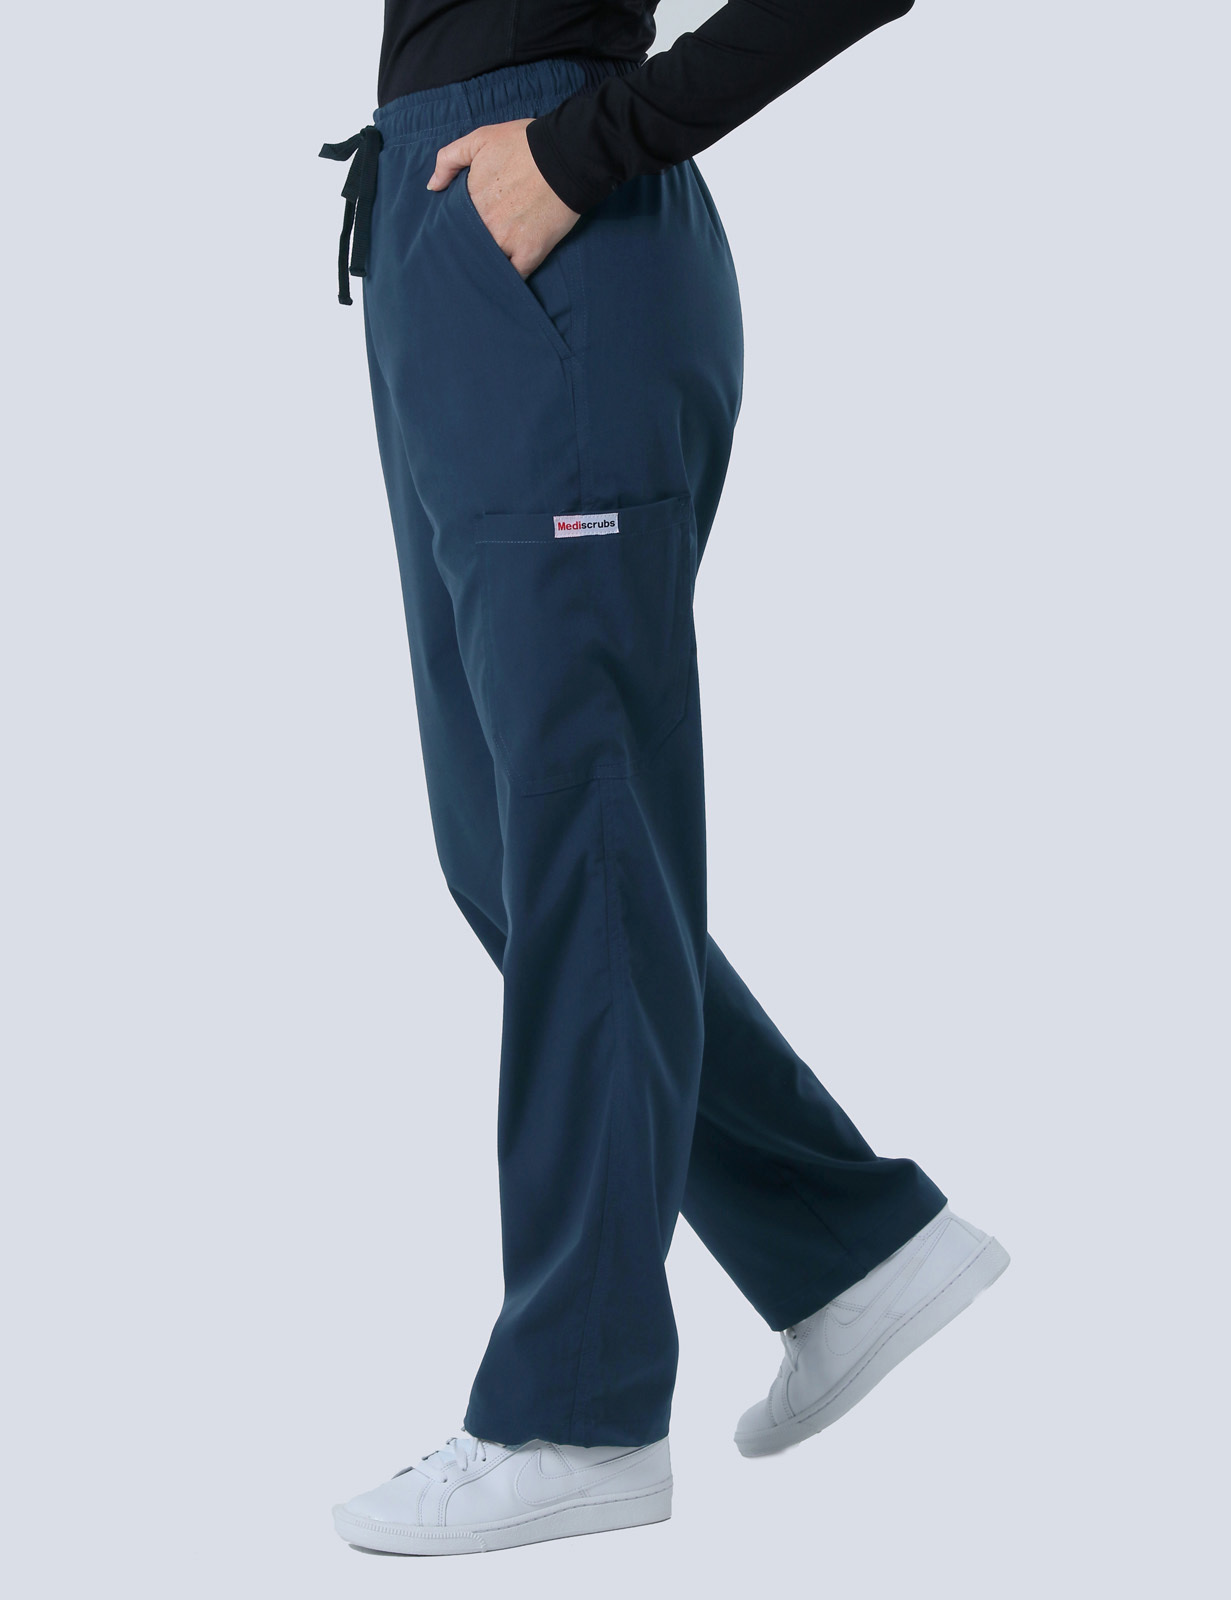 SCPU Hospital - Registered Nurse (4 Pocket Scrub Top and Cargo Pants in Navy incl Logos)